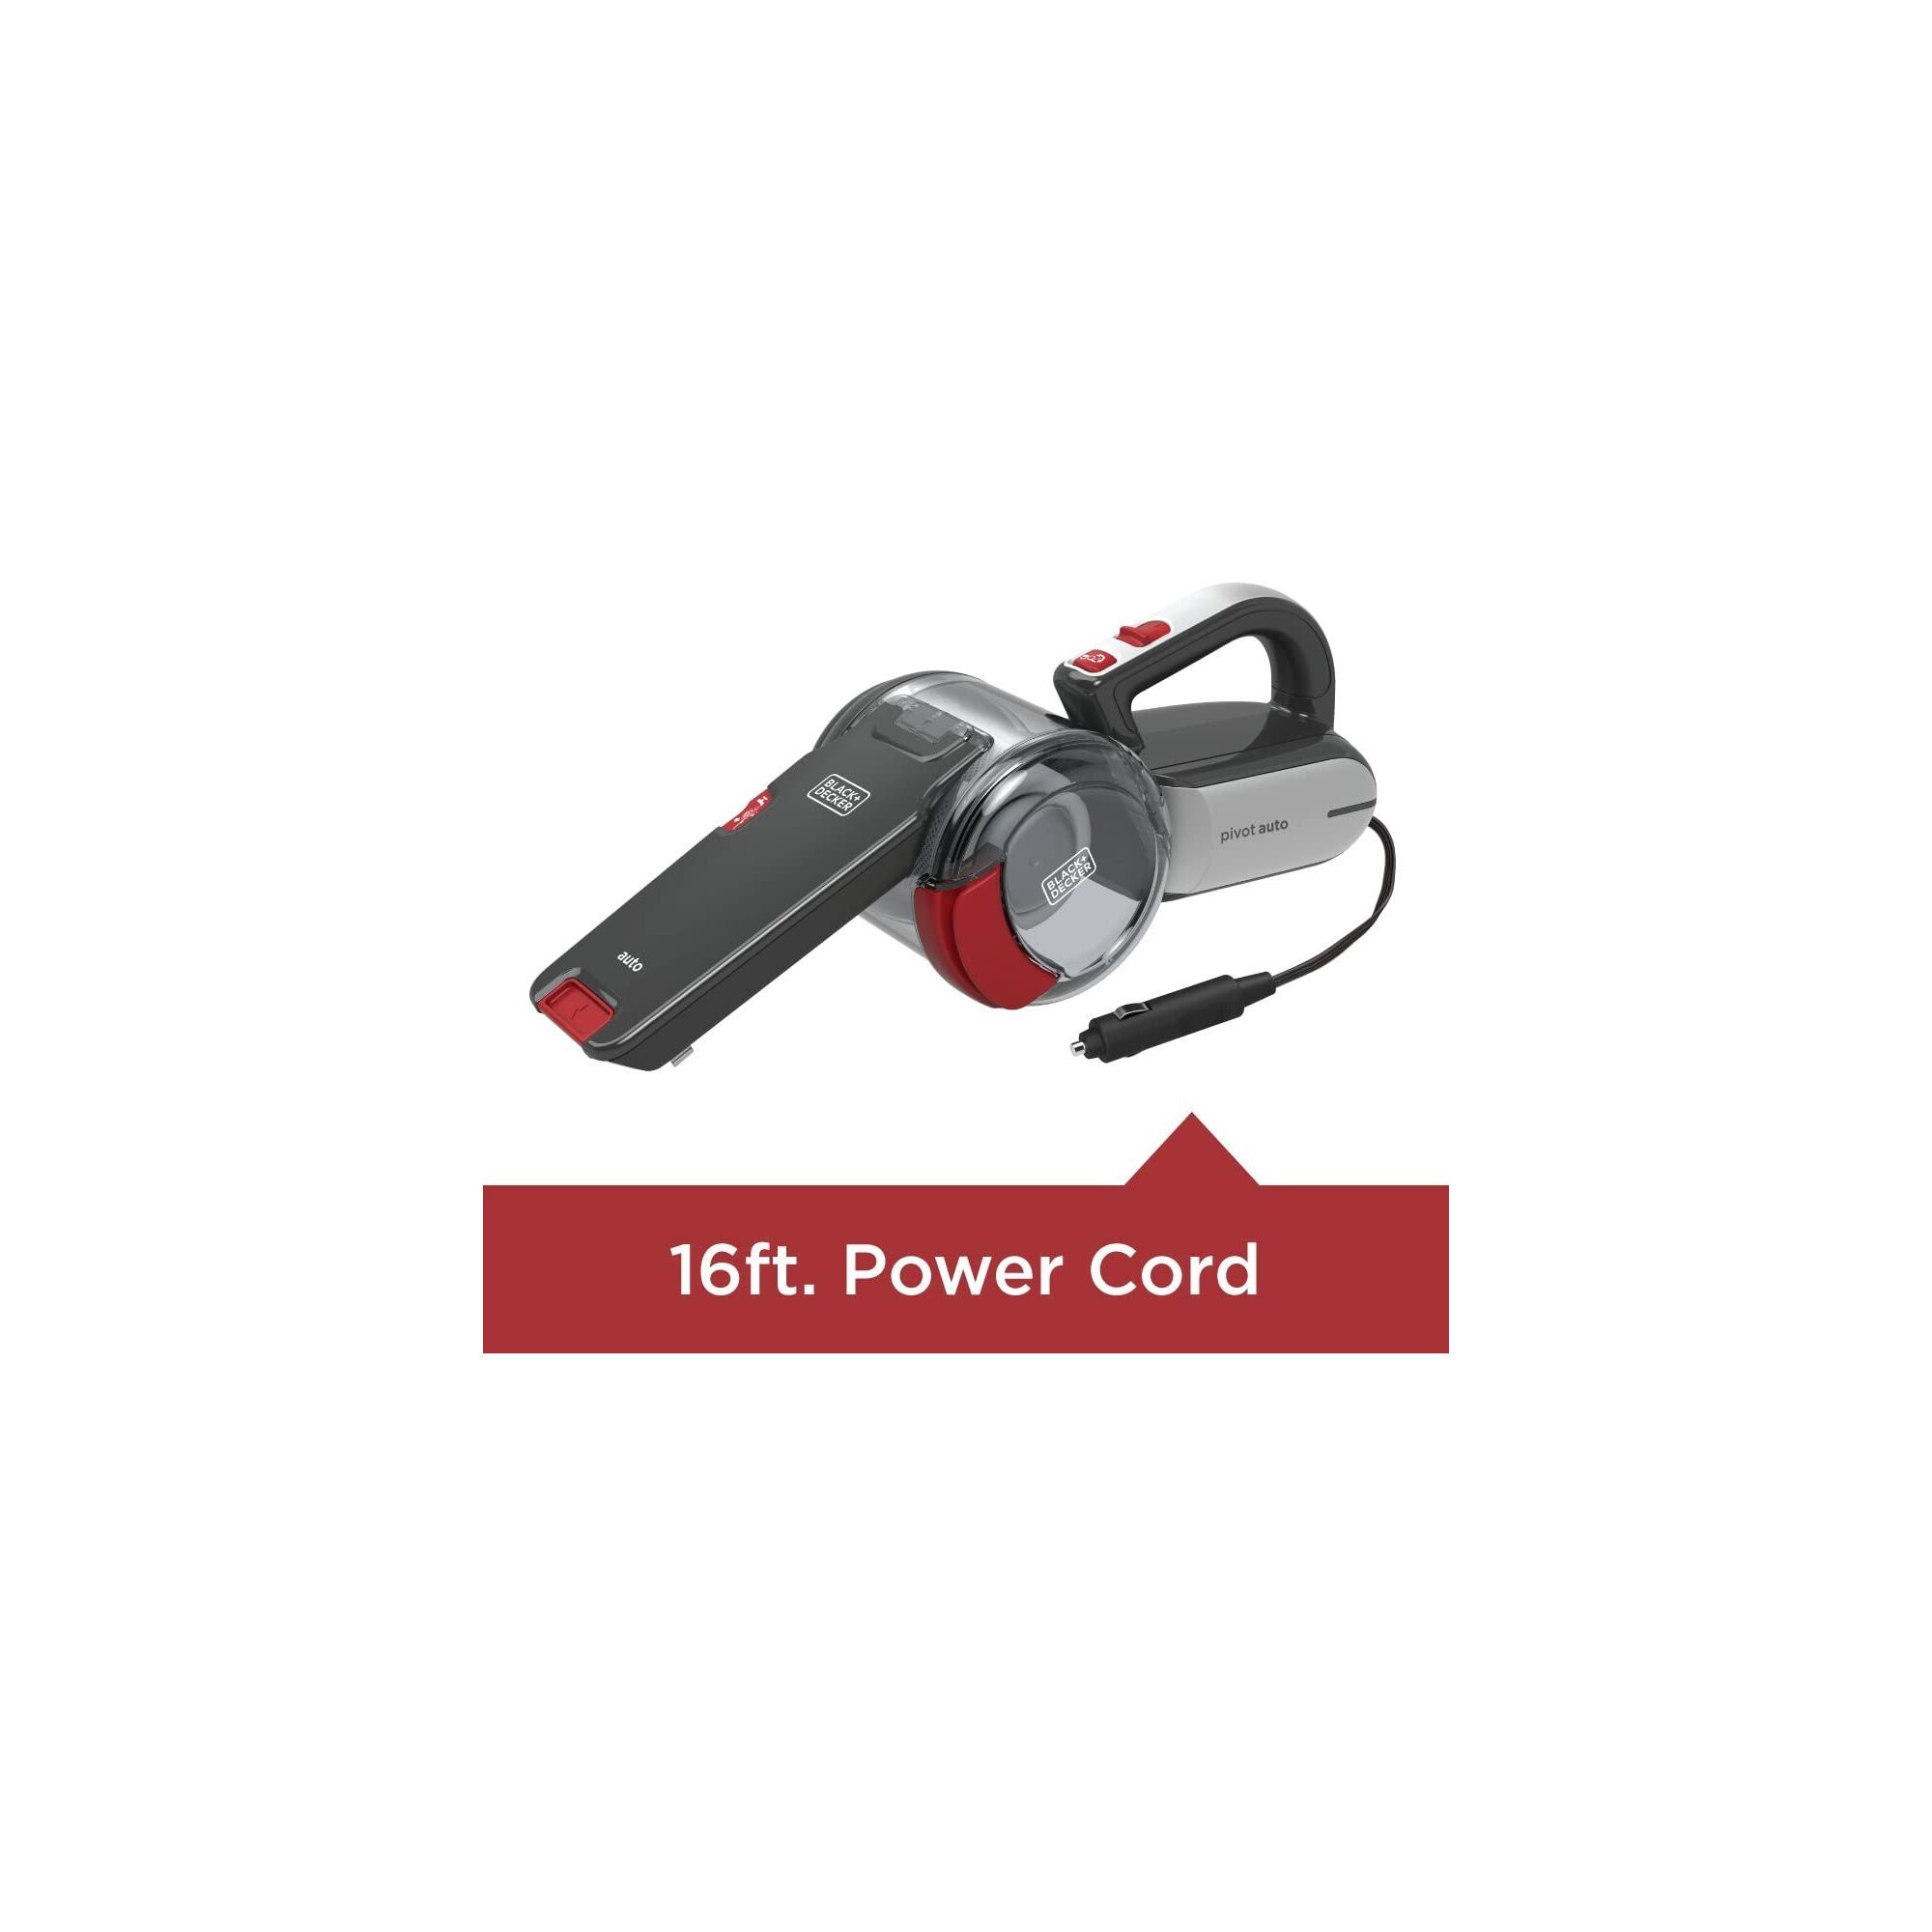 Auto Vacuum with 16 foot power cord.